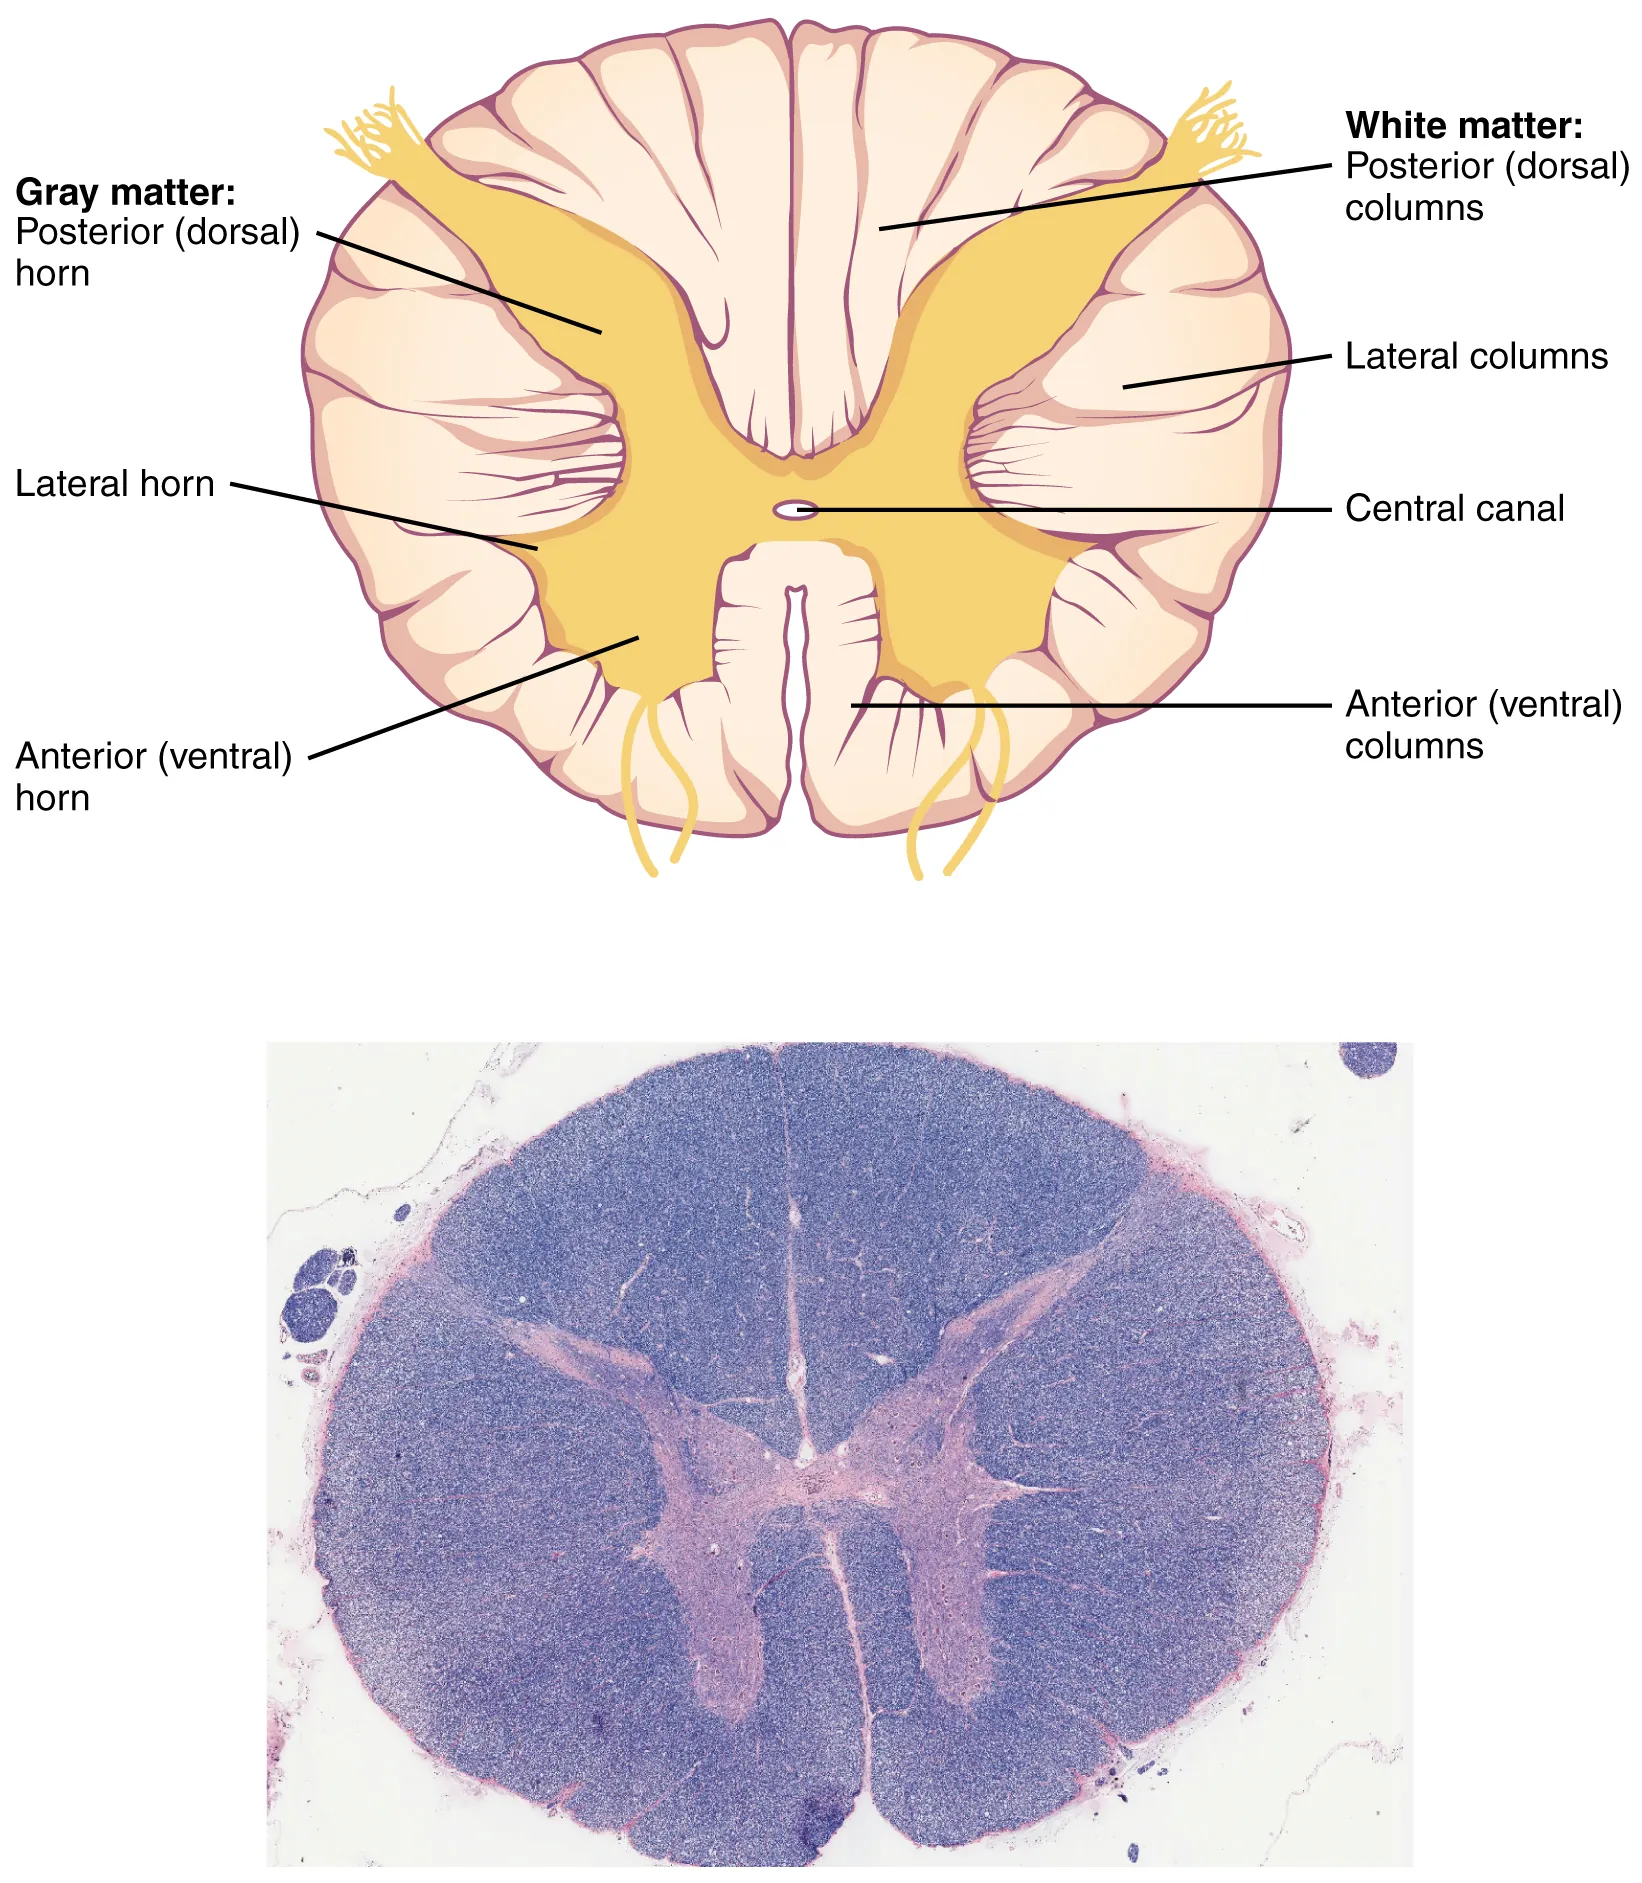 This figure shows the cross section of the spinal cord. The top panel shows a diagram of the cross section and the major parts are labeled. The bottom panel shows an ultrasound image of the spinal cord cross section.